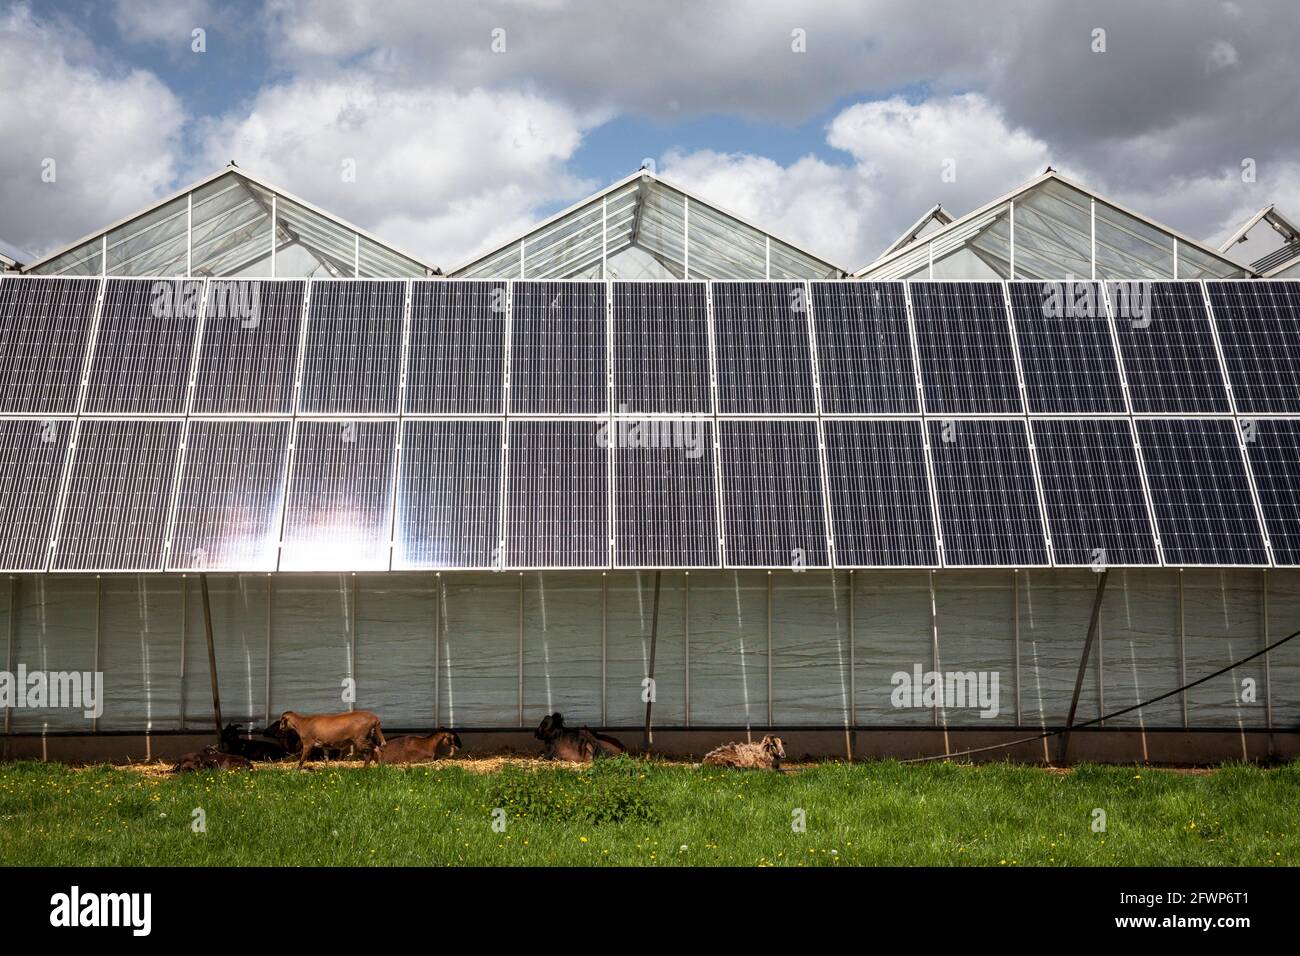 photovoltaic modules, solar panels on greenhouses of a nursery garden in Pulheim-Sinnersdorf, goats lie in the shade, North Rhine-Westphalia, Germany. Stock Photo